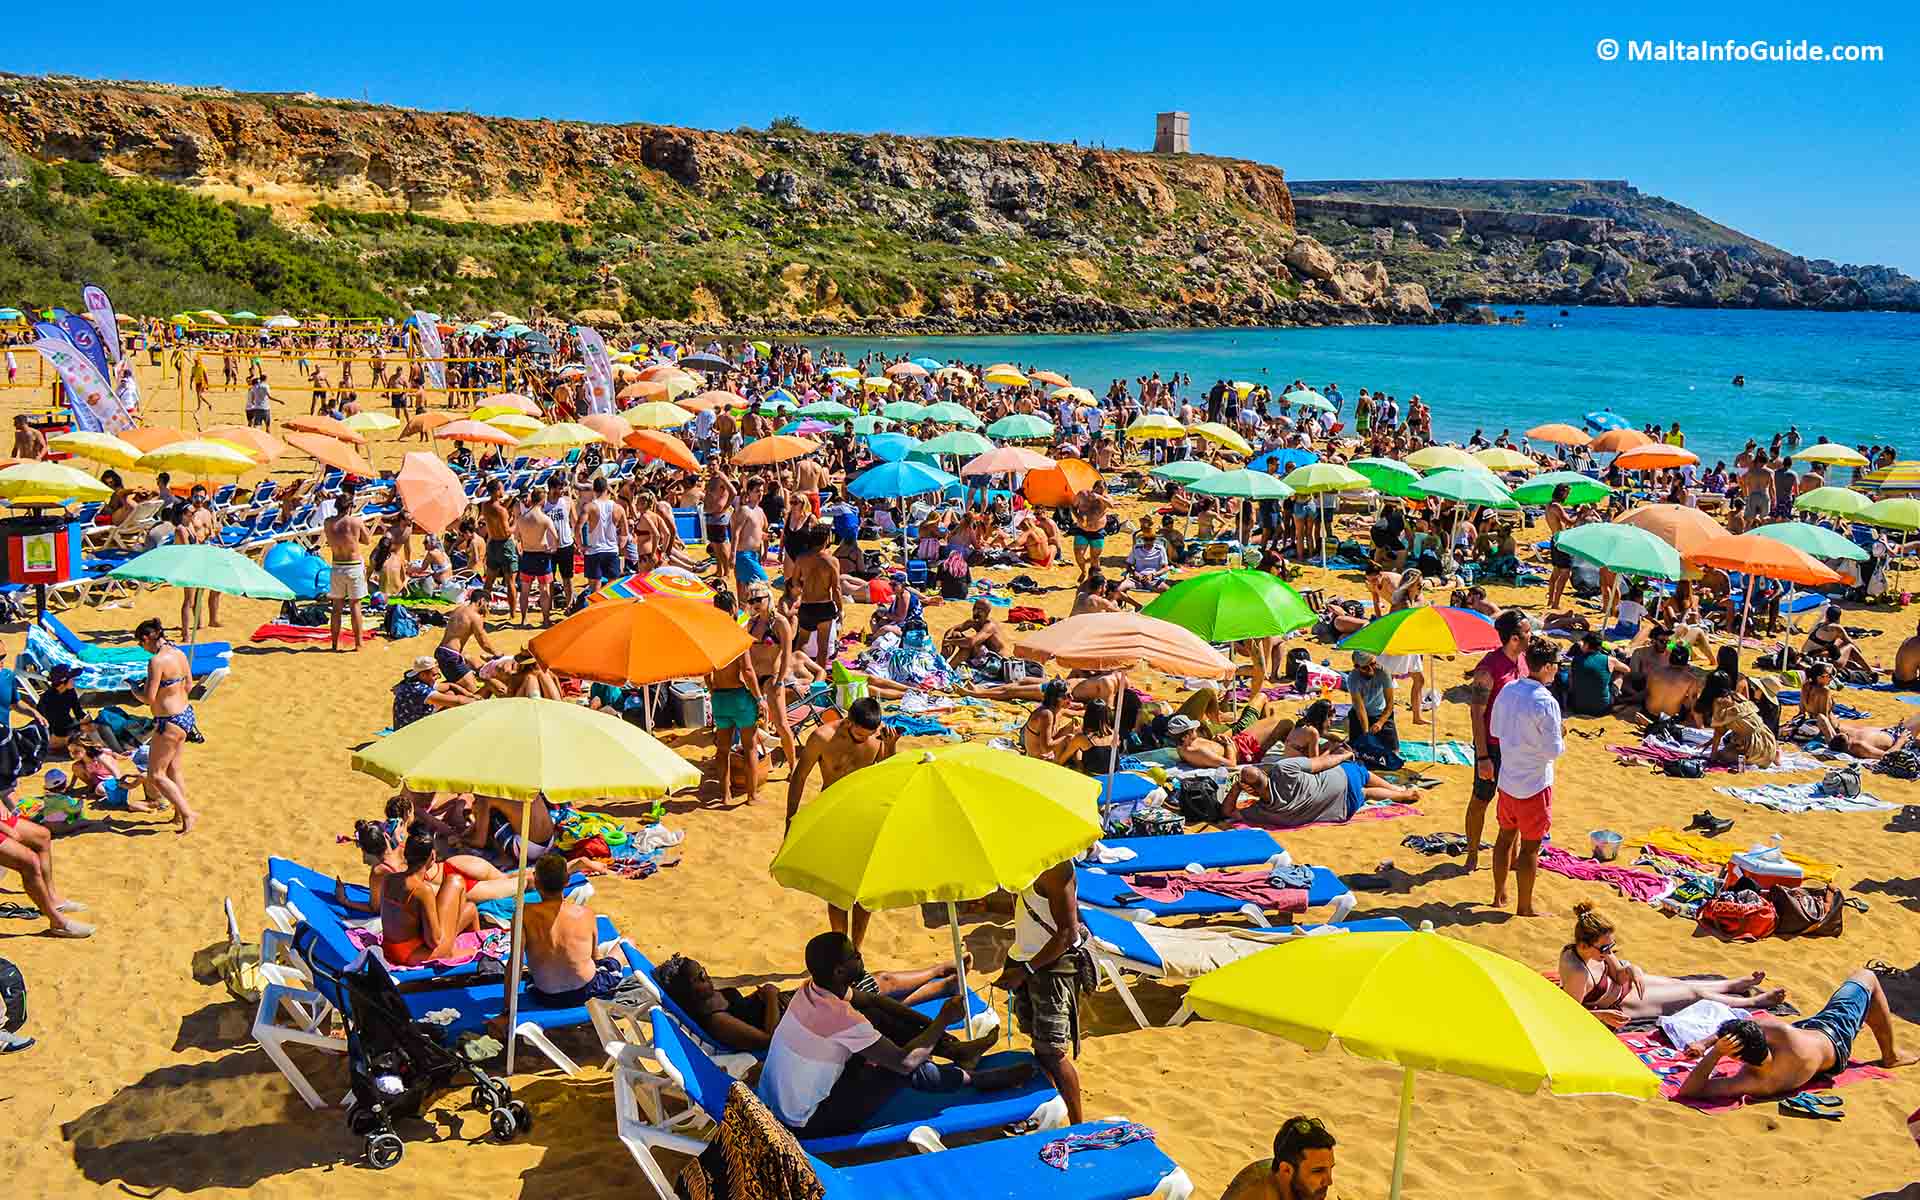 Golden Bay is packed with people sunbathing and swimming.